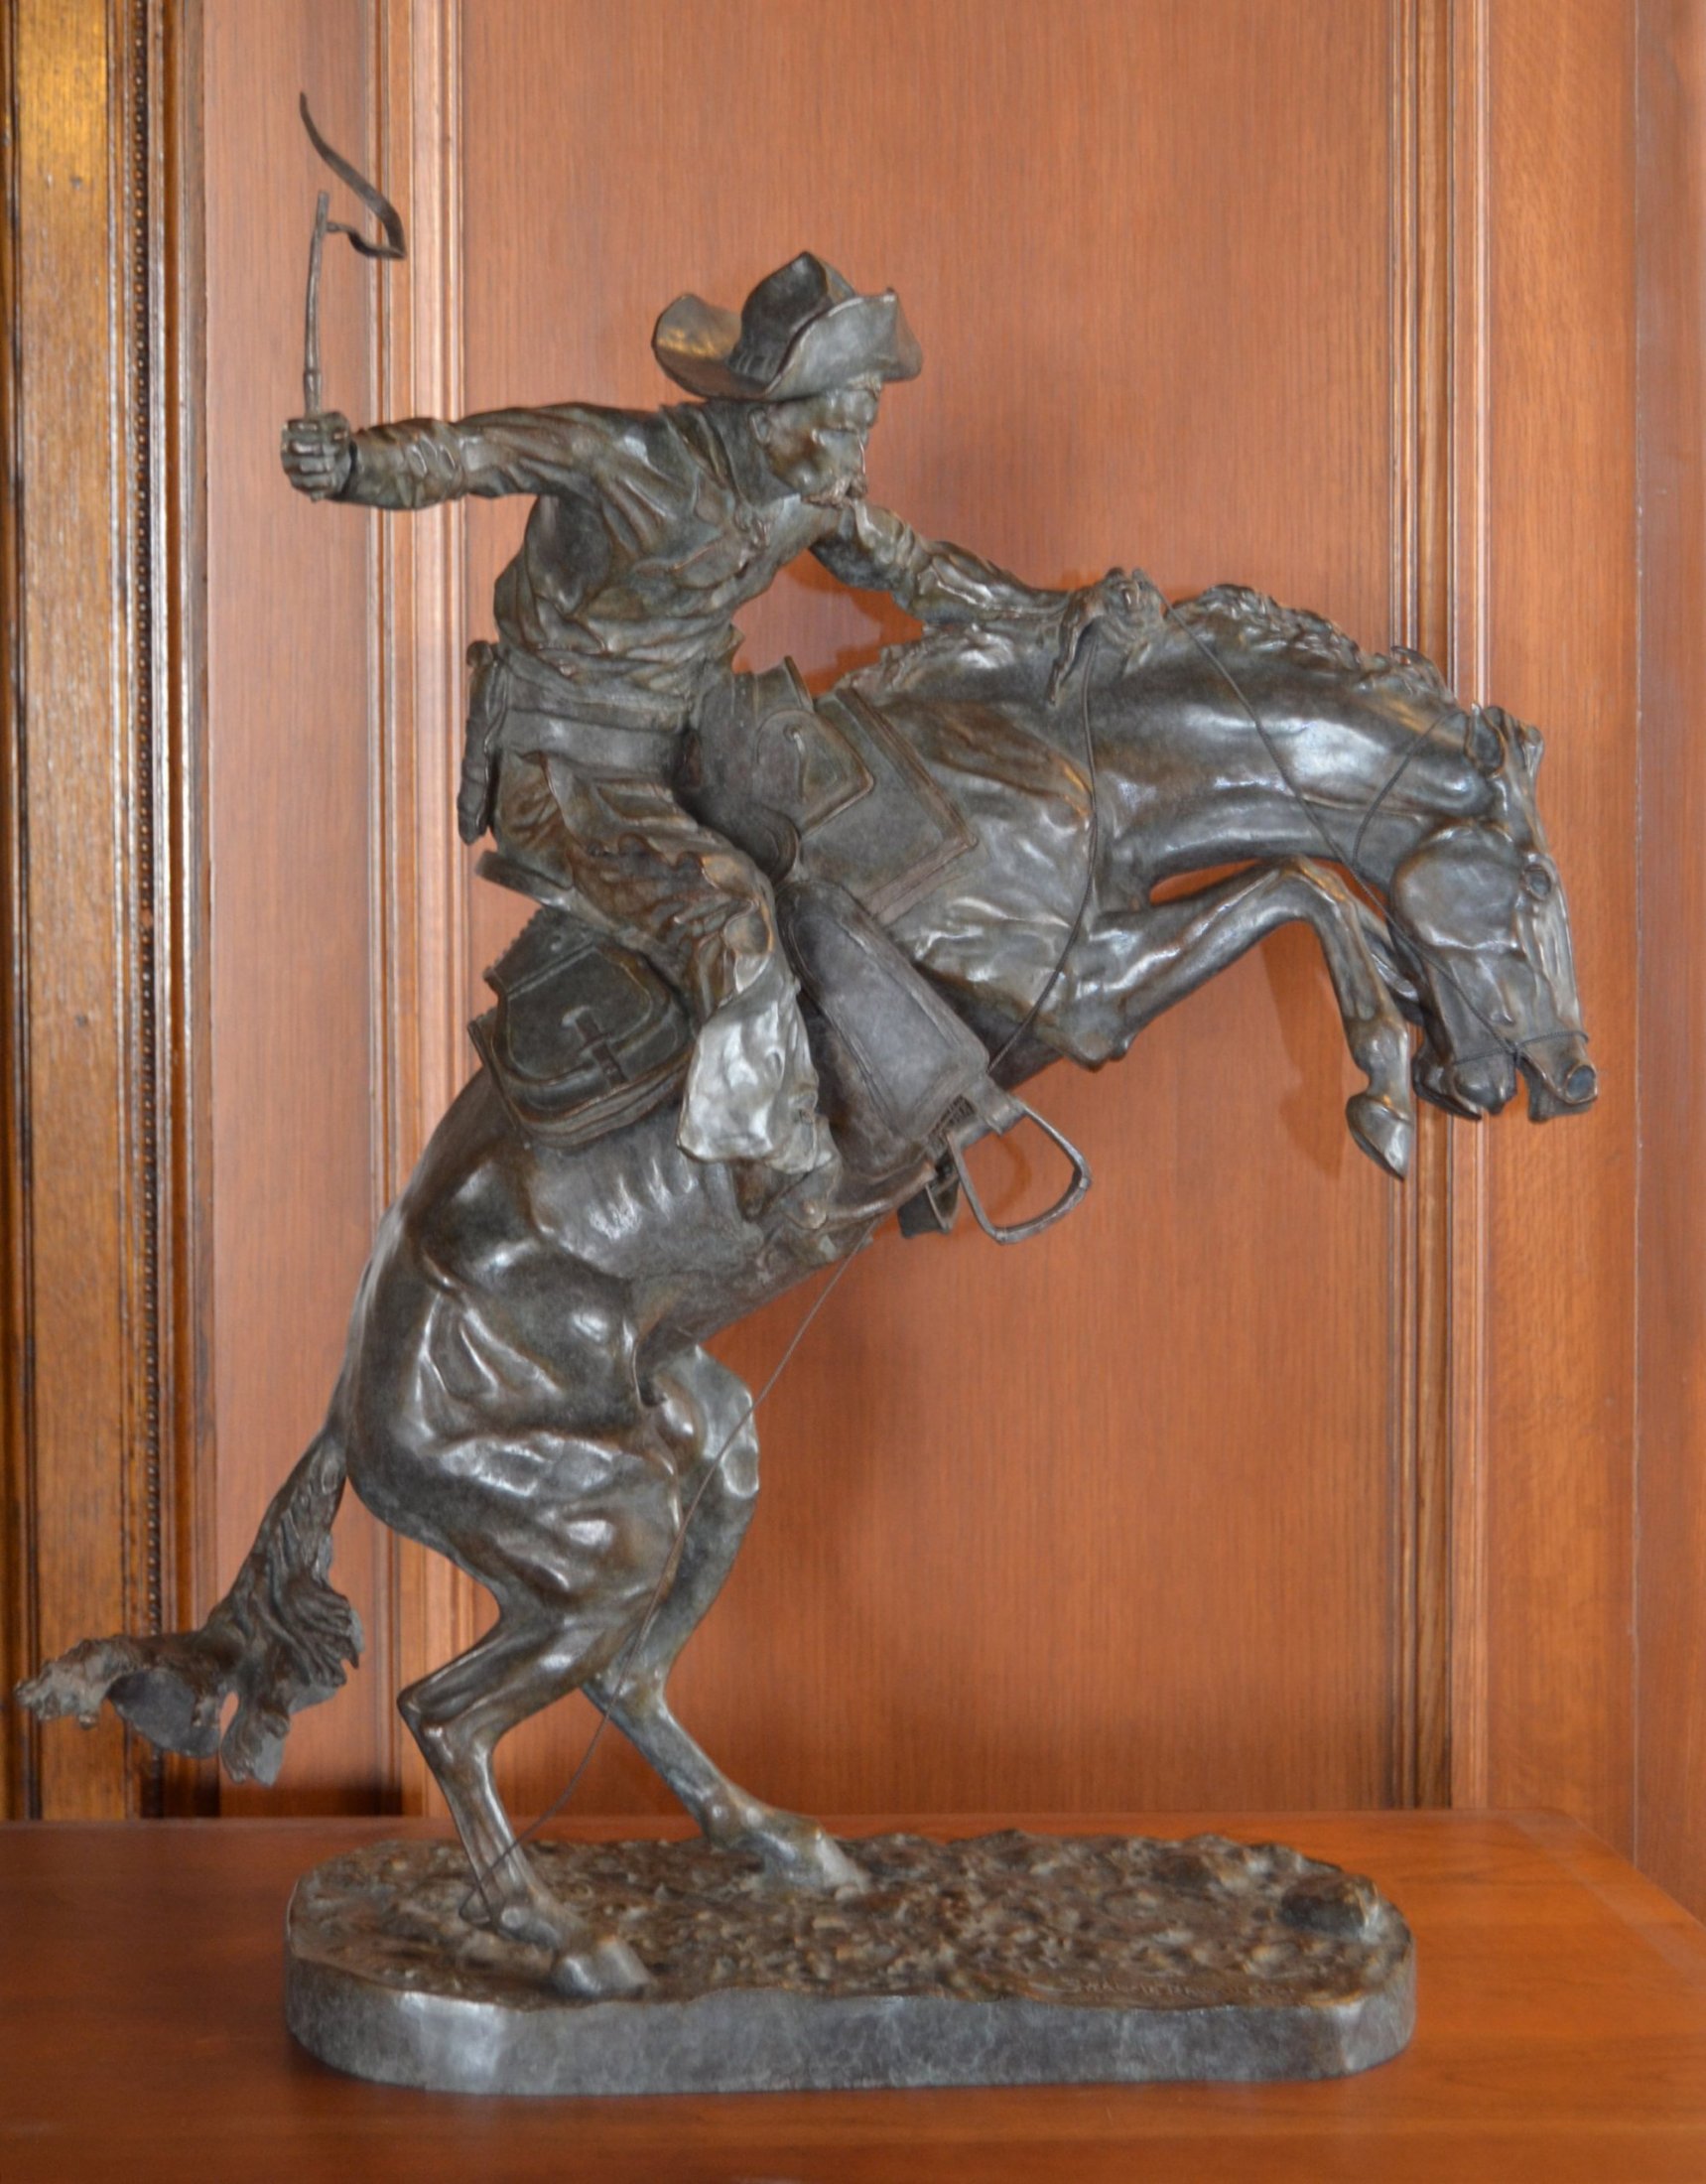 The Broncho Buster Digital Bronze